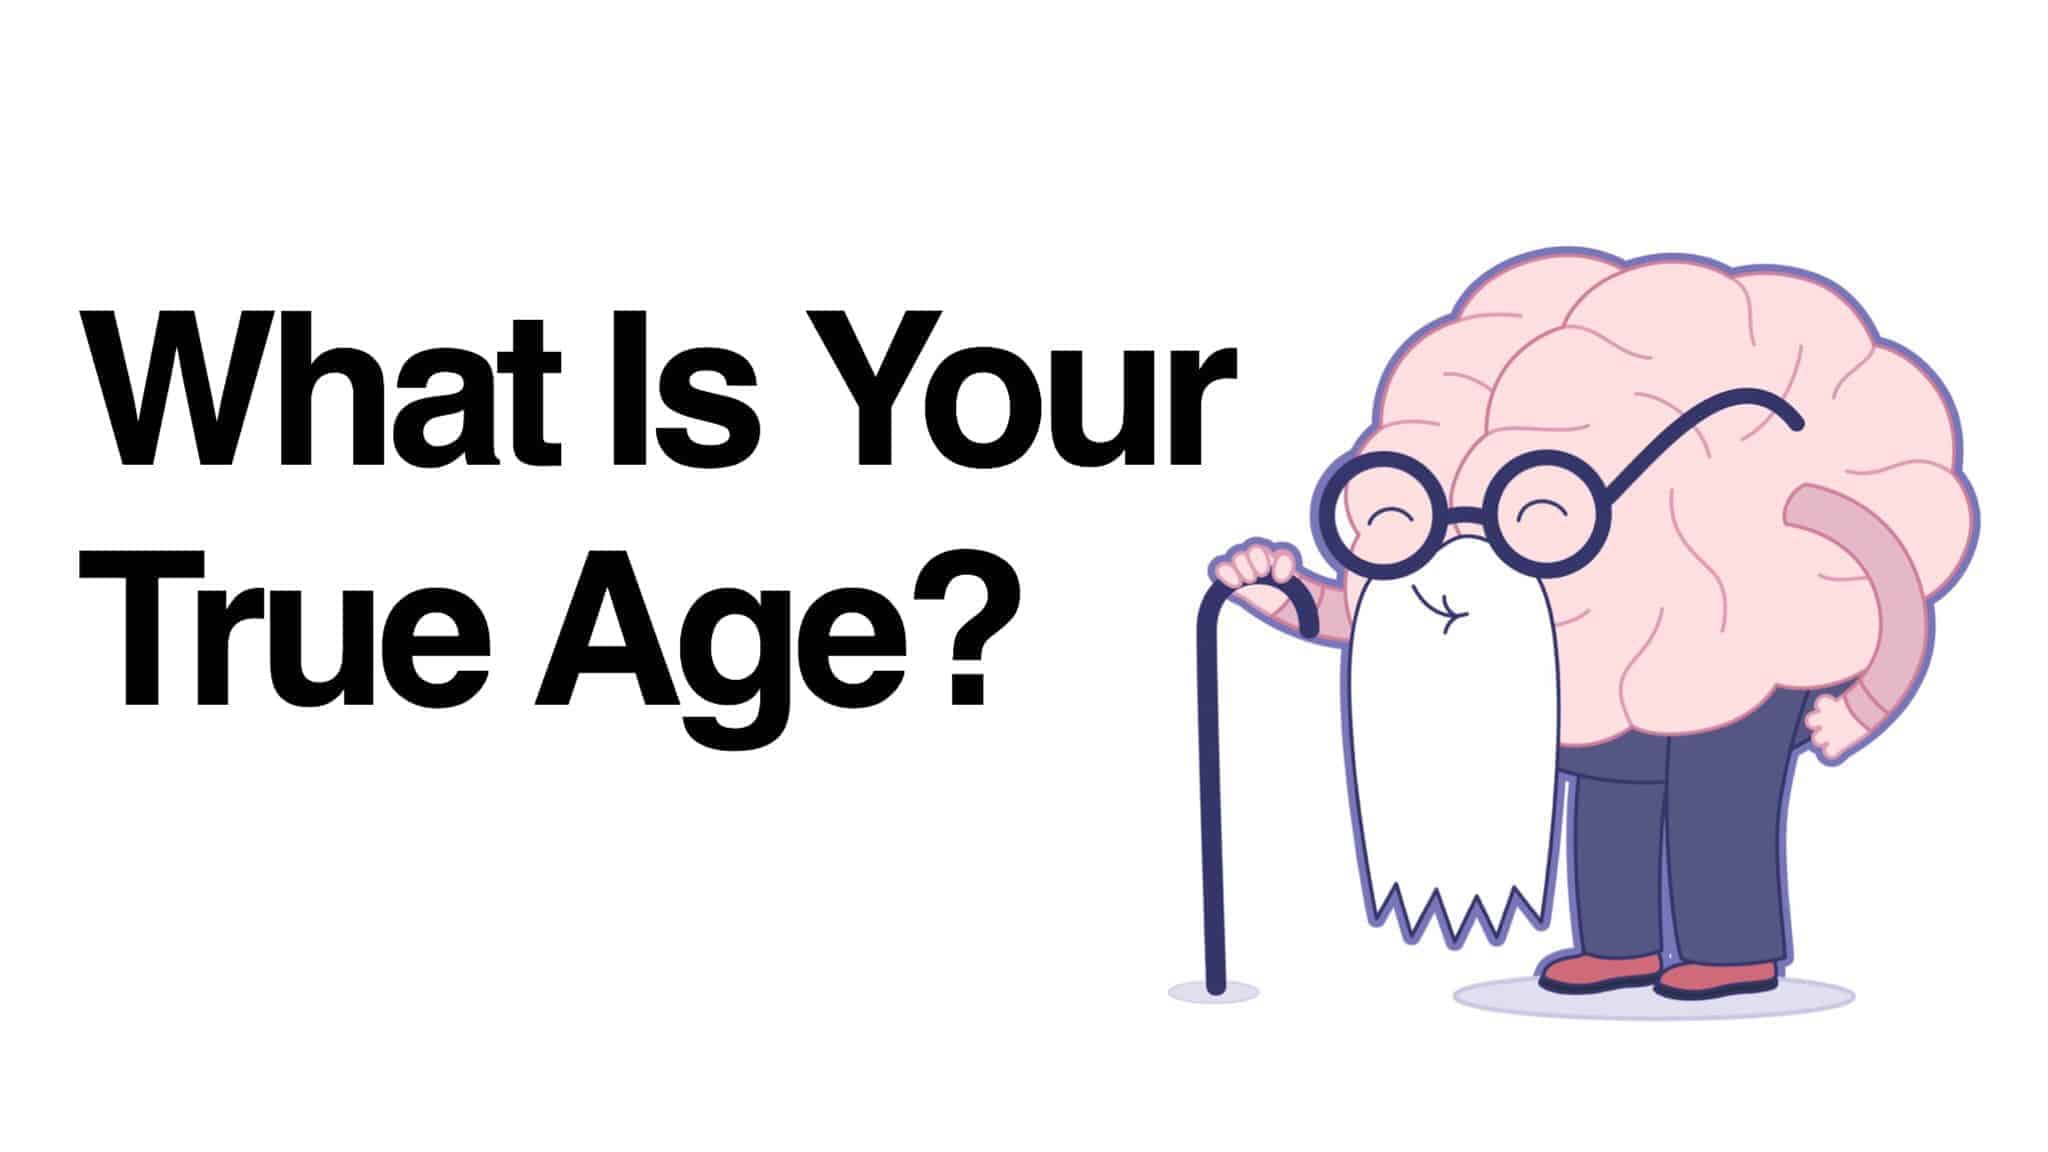 What Is Your True Age, According To Your Mind?